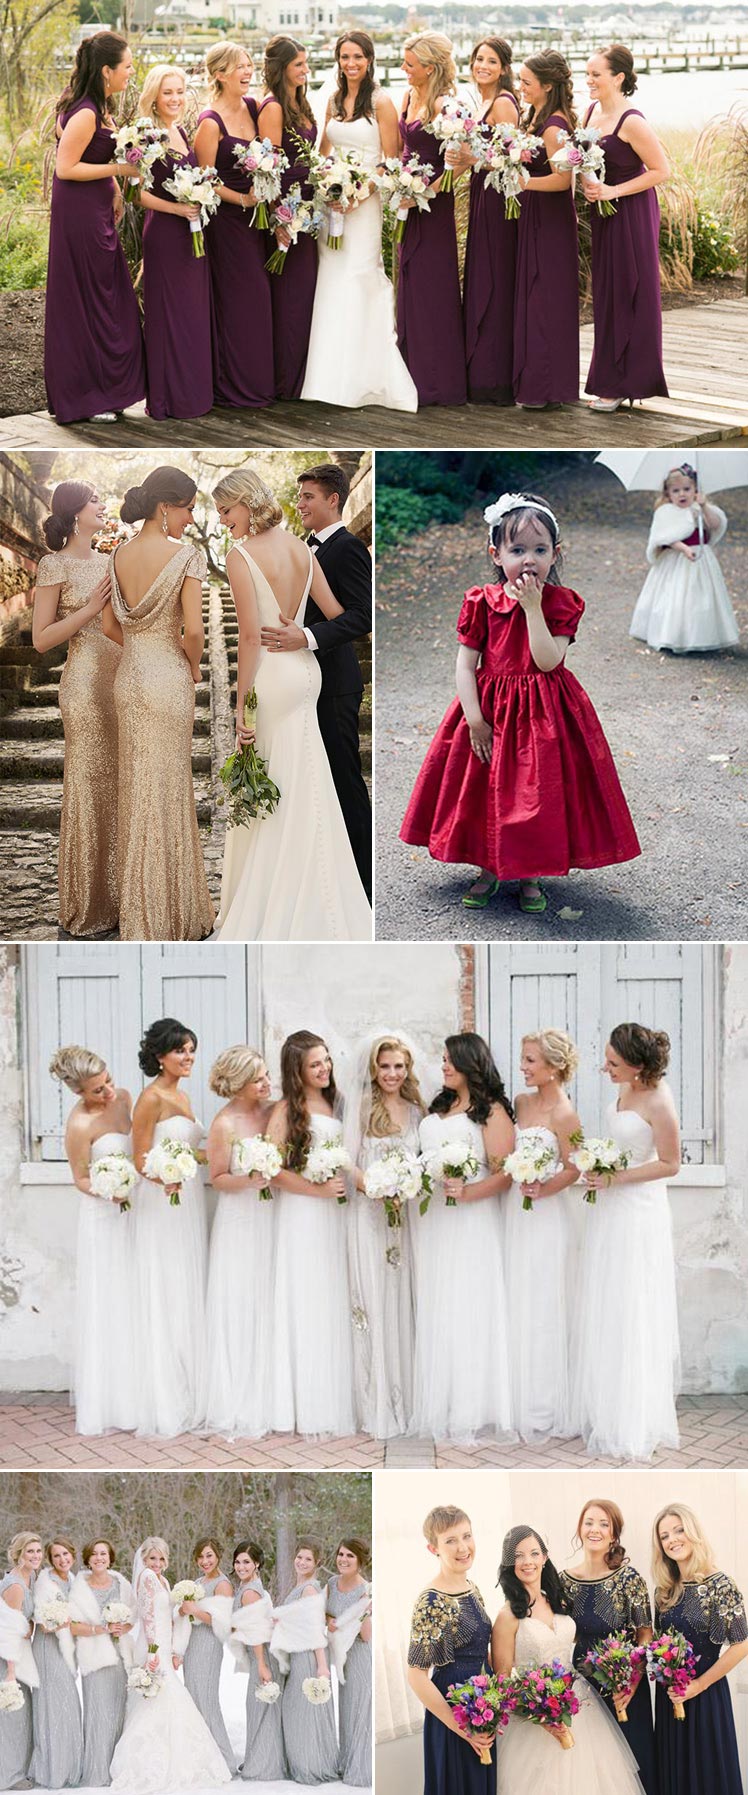 Style ideas for your bridesmaids at your winter wedding